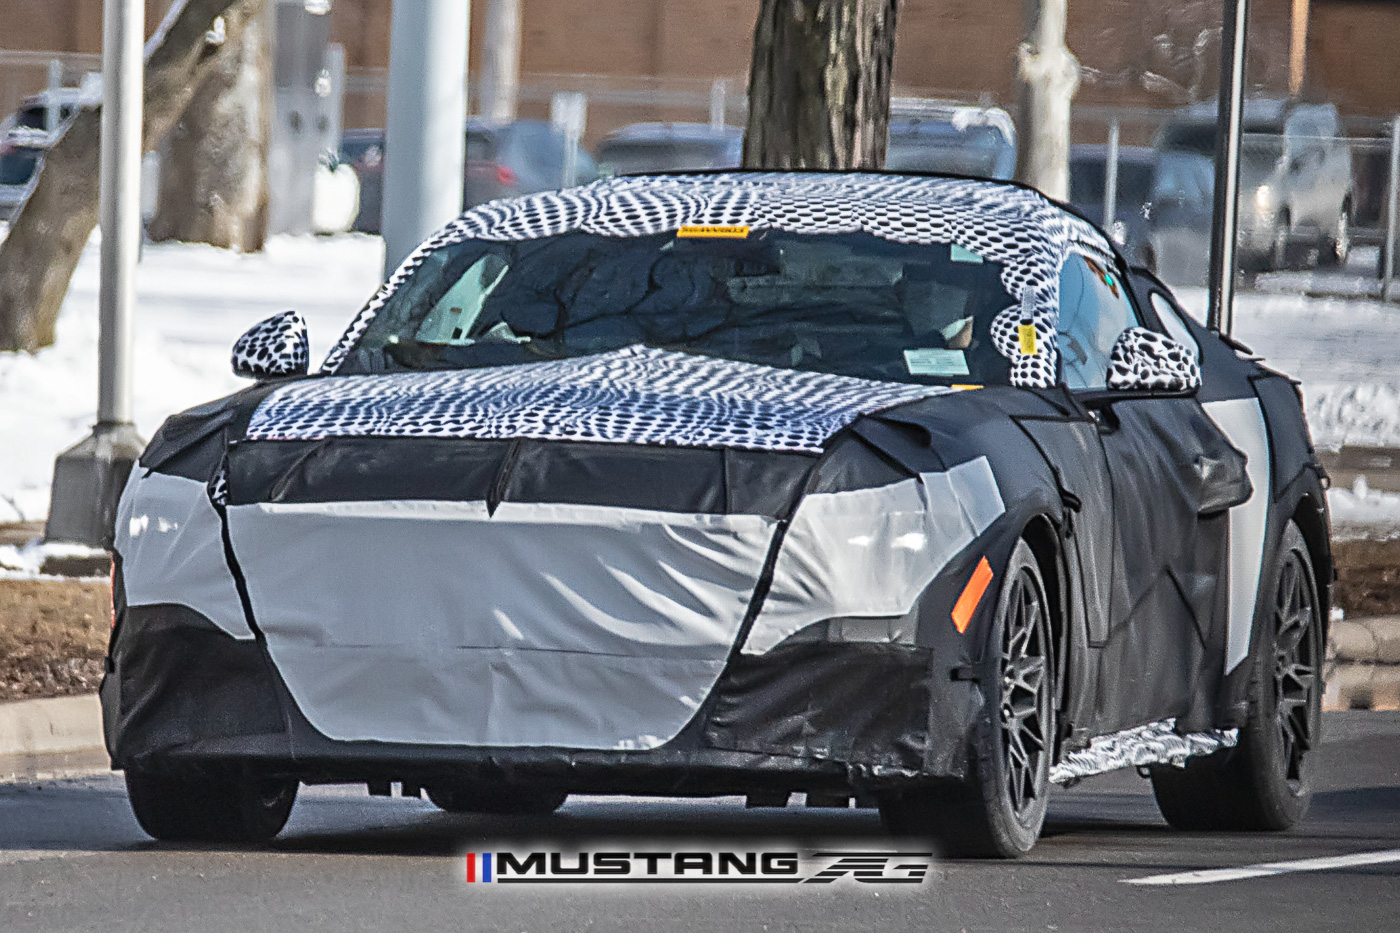 S650 Mustang Spied: New Mustang Prototype w/ Mach 1-Style Wheels, Upgraded Dual Caliper Rear Brakes 📸 s650-mustang-new-mach1-prototype-spied-1